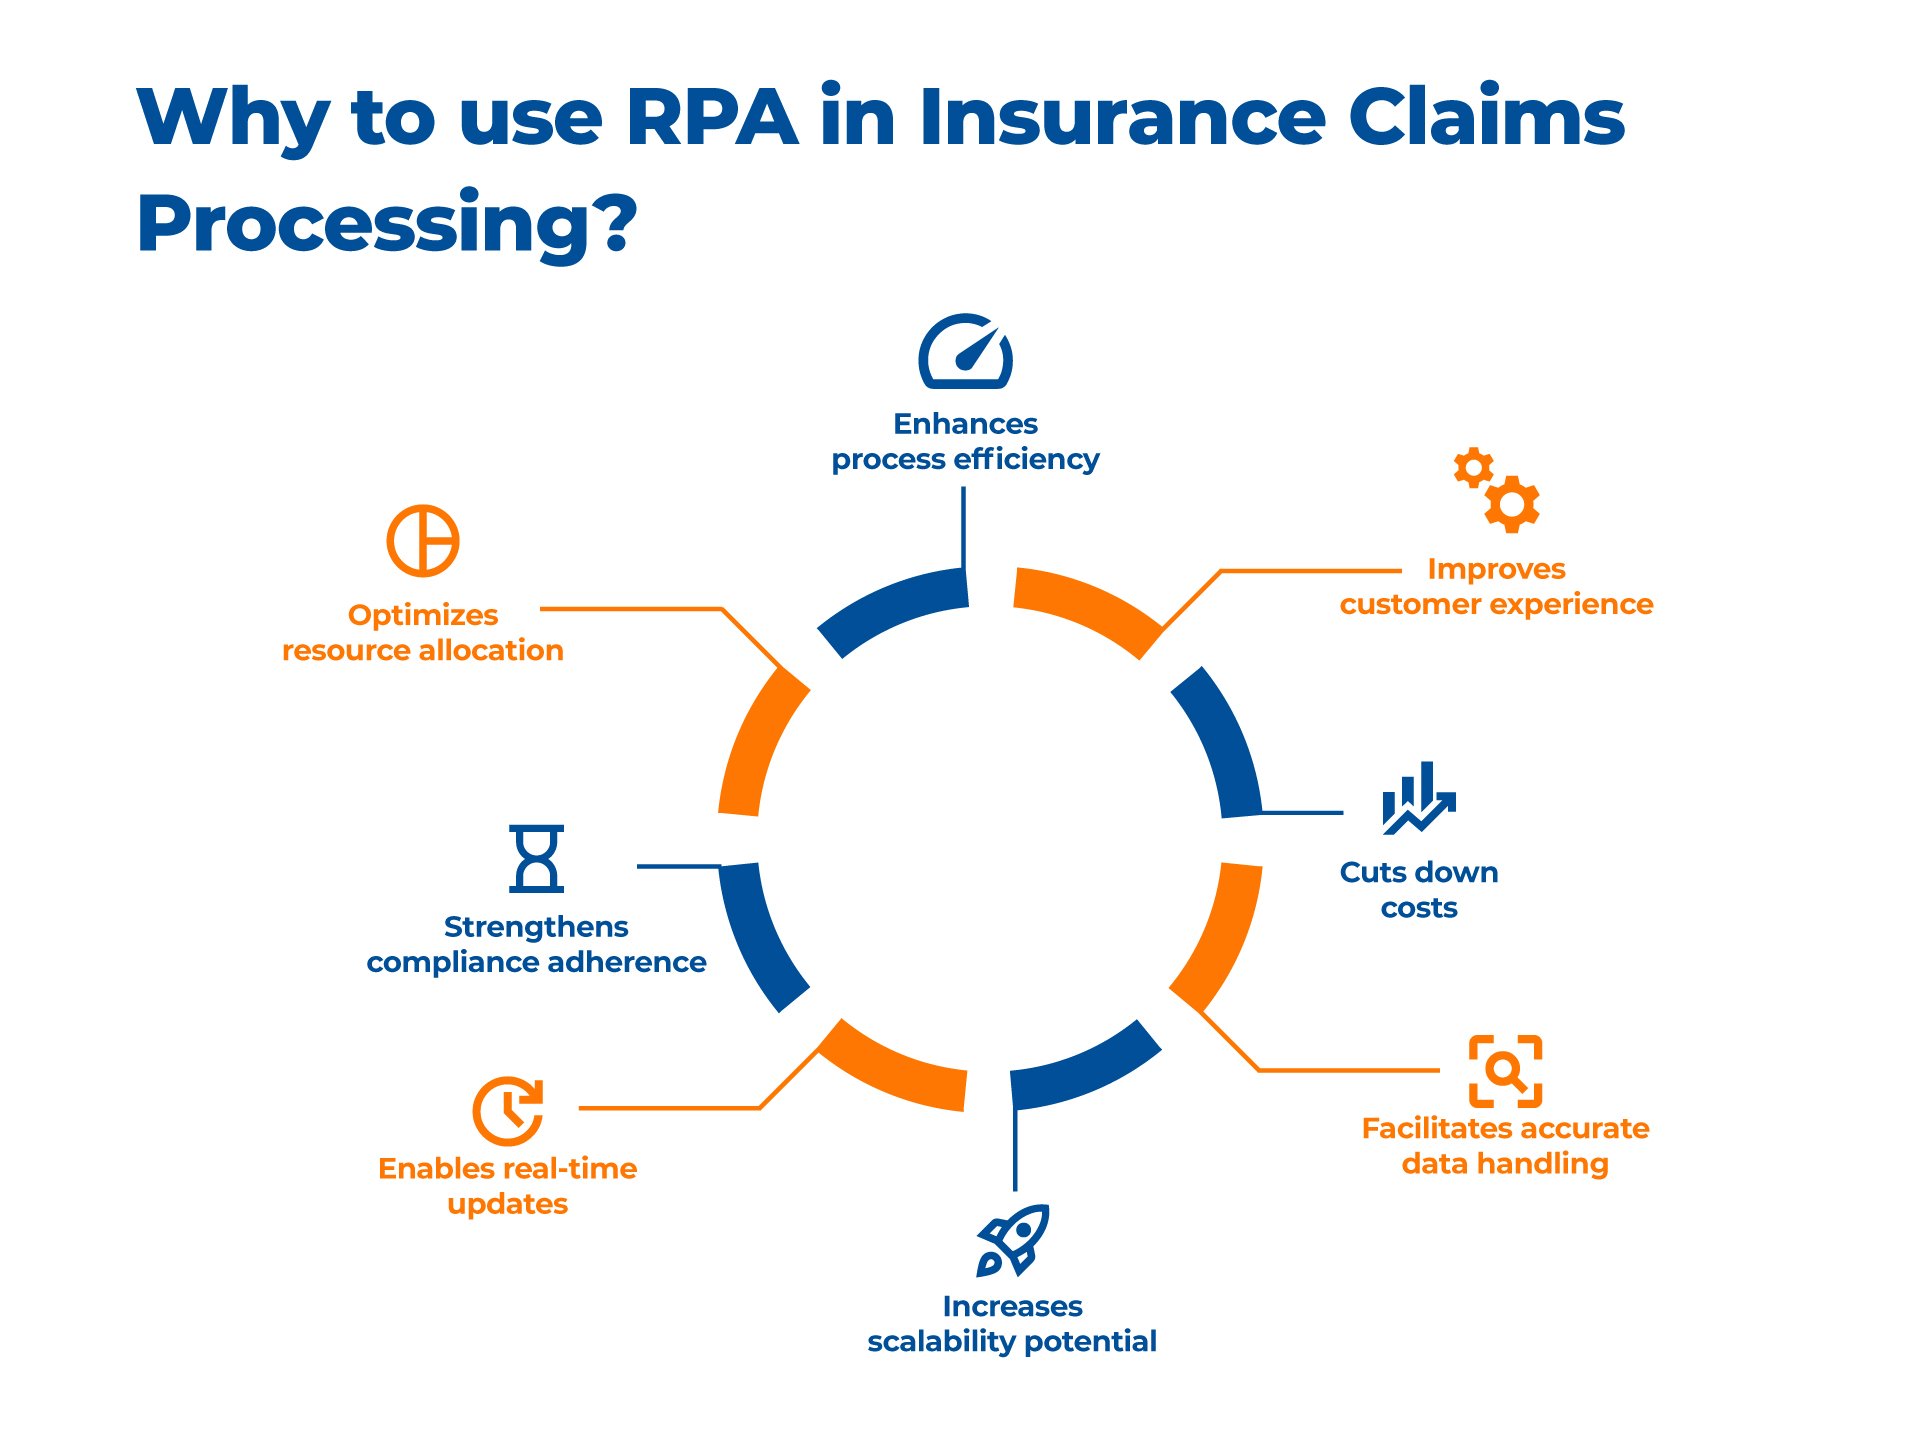 Why to use RPA in Insurance Claims Processing_Kanerika 